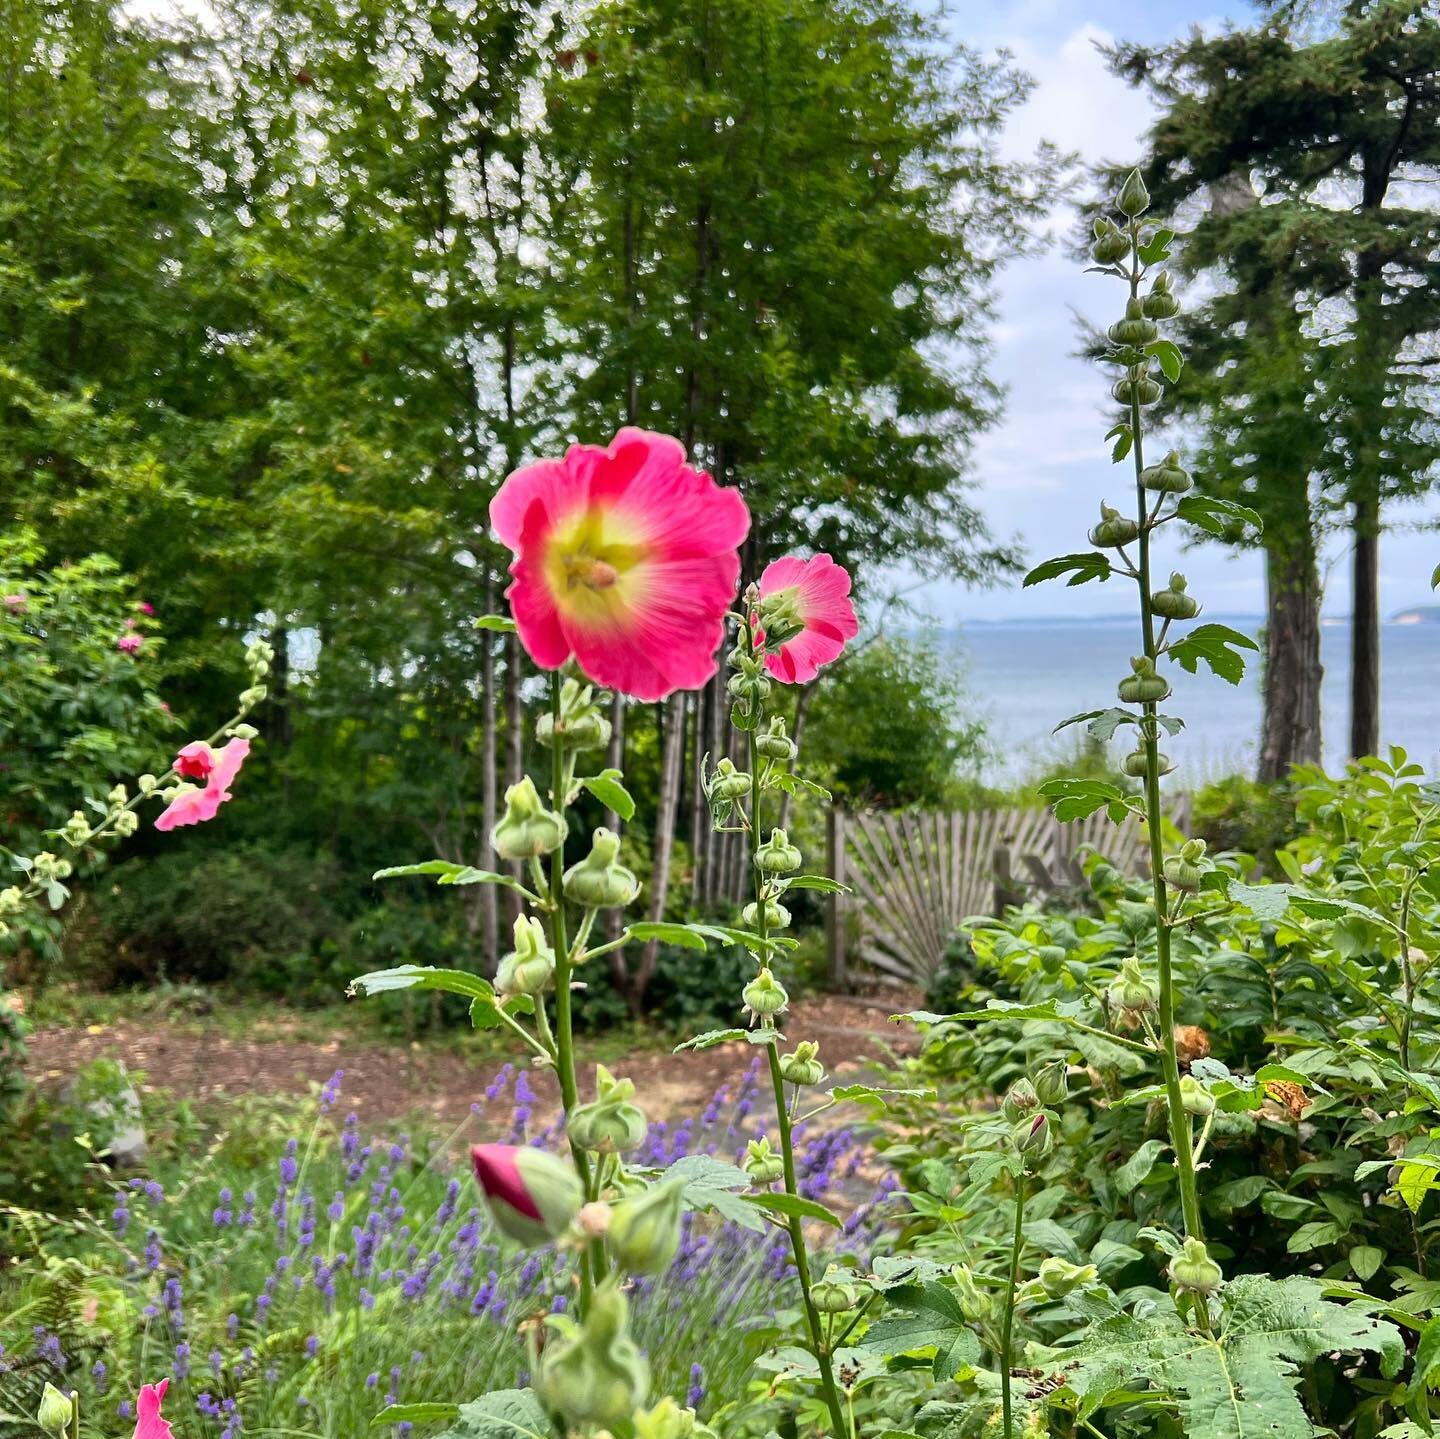 The Hollyhocks on Orcas are my favorite. Can&rsquo;t wait to go flower hunting today for painting inspiration. And the water views aren&rsquo;t bad either. 

#hollyhocks #pnw #orcasisland